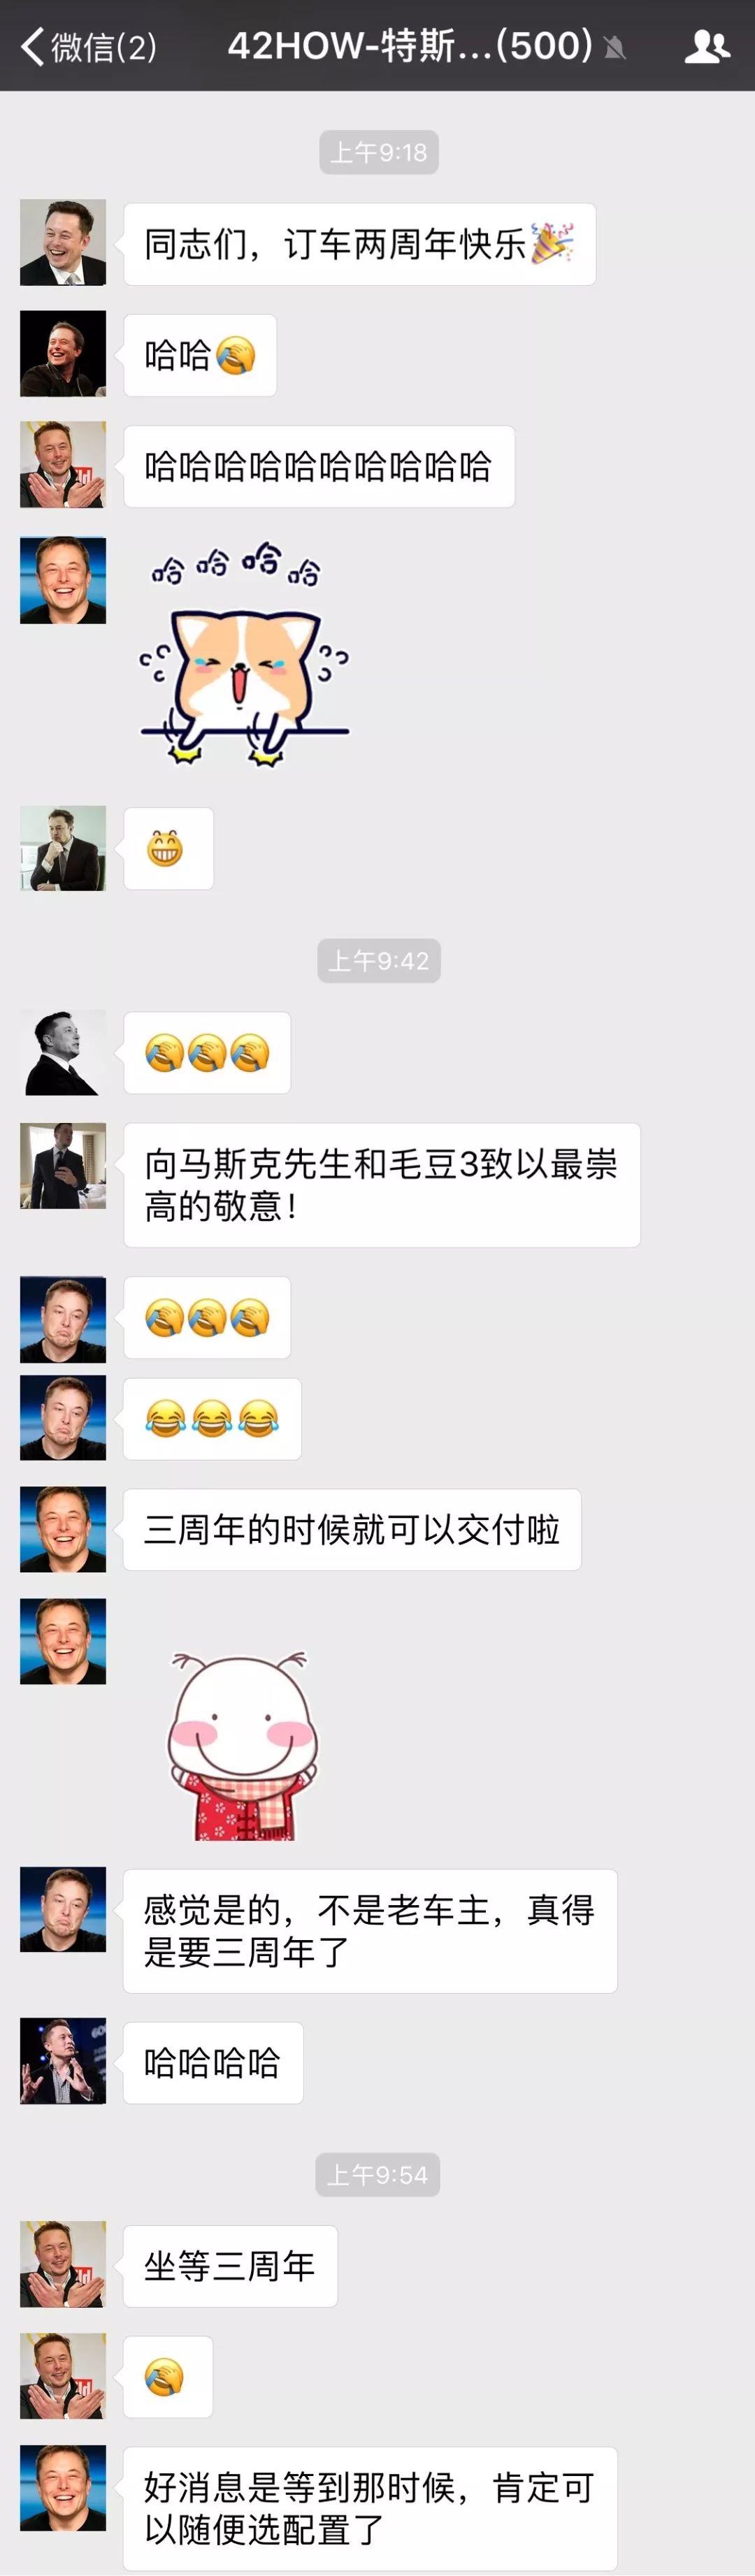 Screenshot of a group chat with Musk faces covering faces